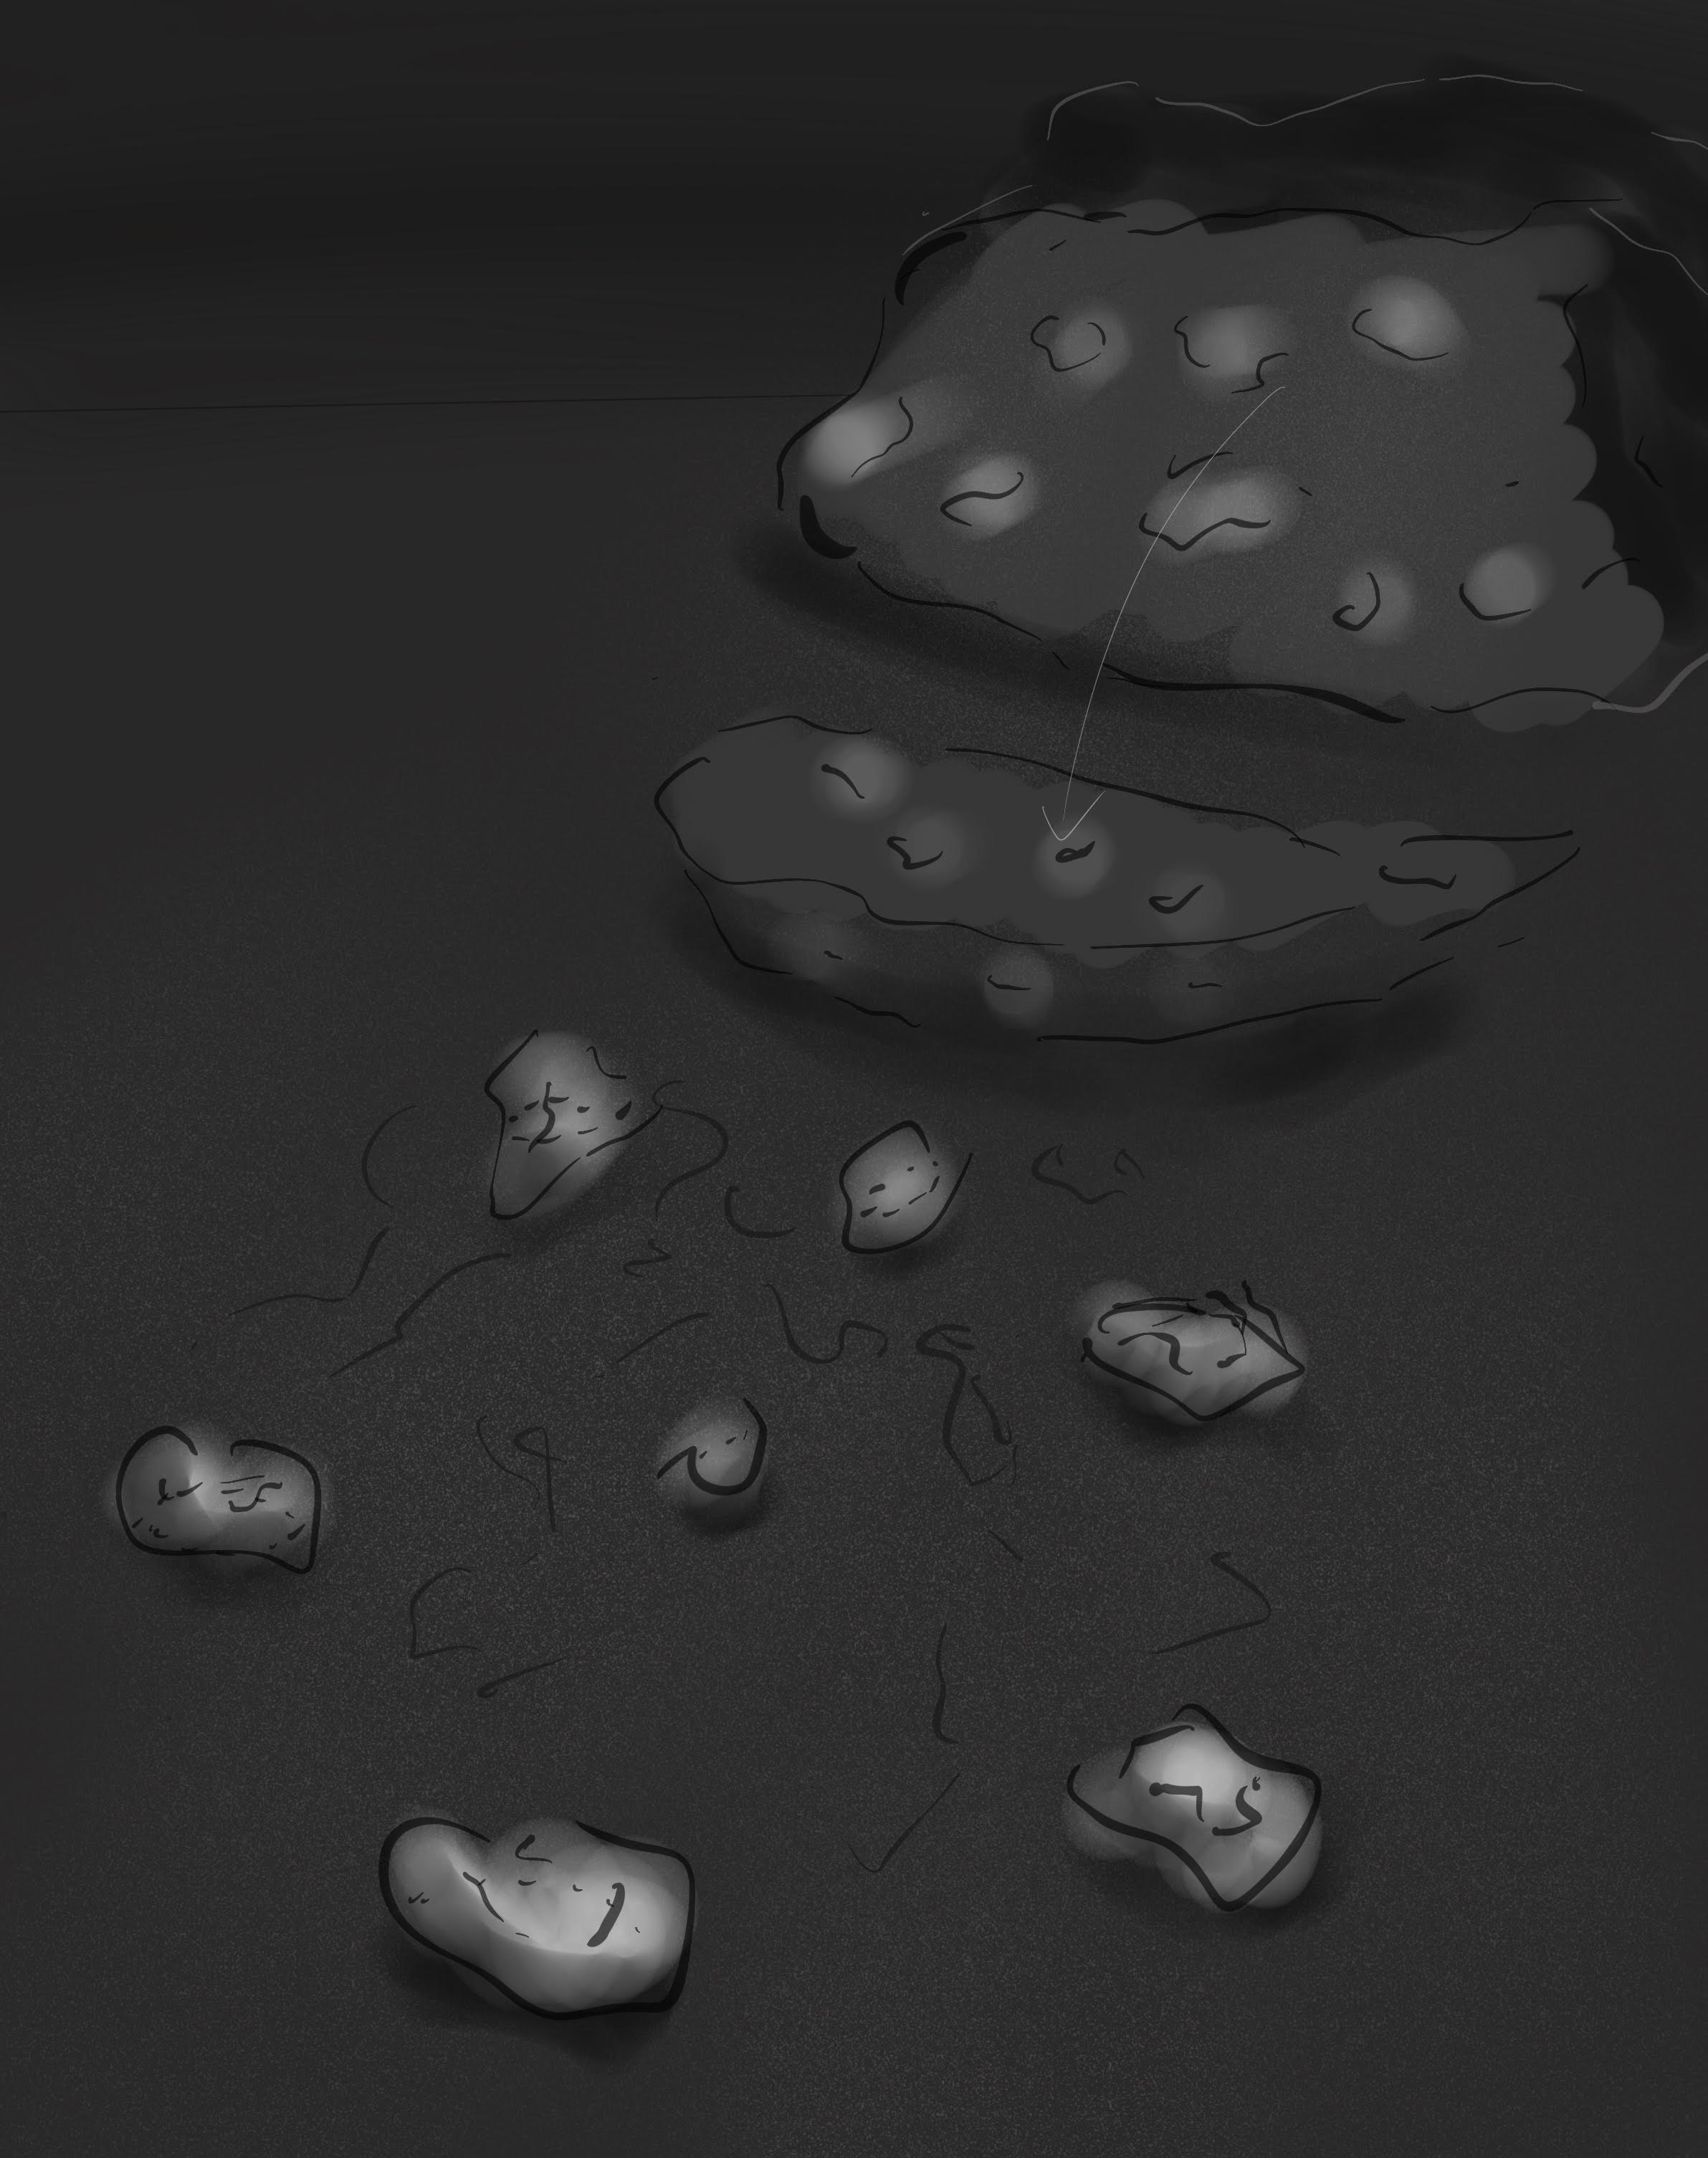 Sketch of the meteorite split open, spilling grains onto a surface.